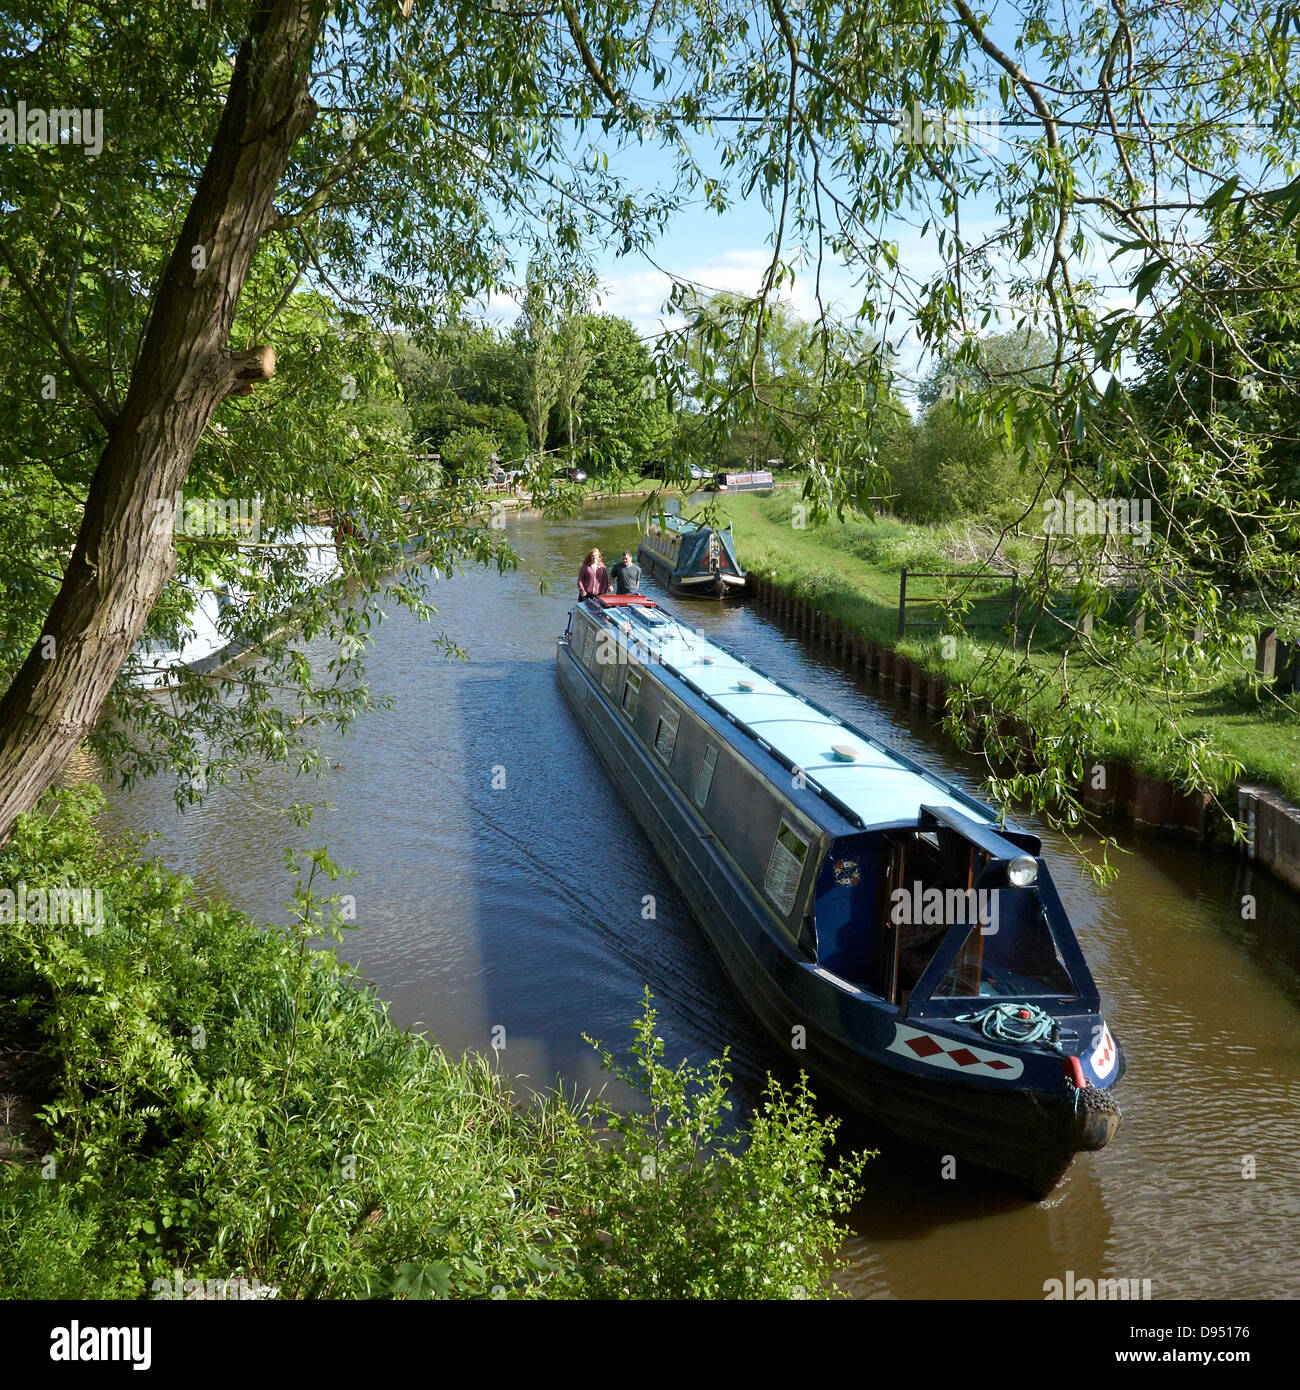 The Trent and Mersey Canal in Elworth, Sandbach Cheshire UK Stock Photo